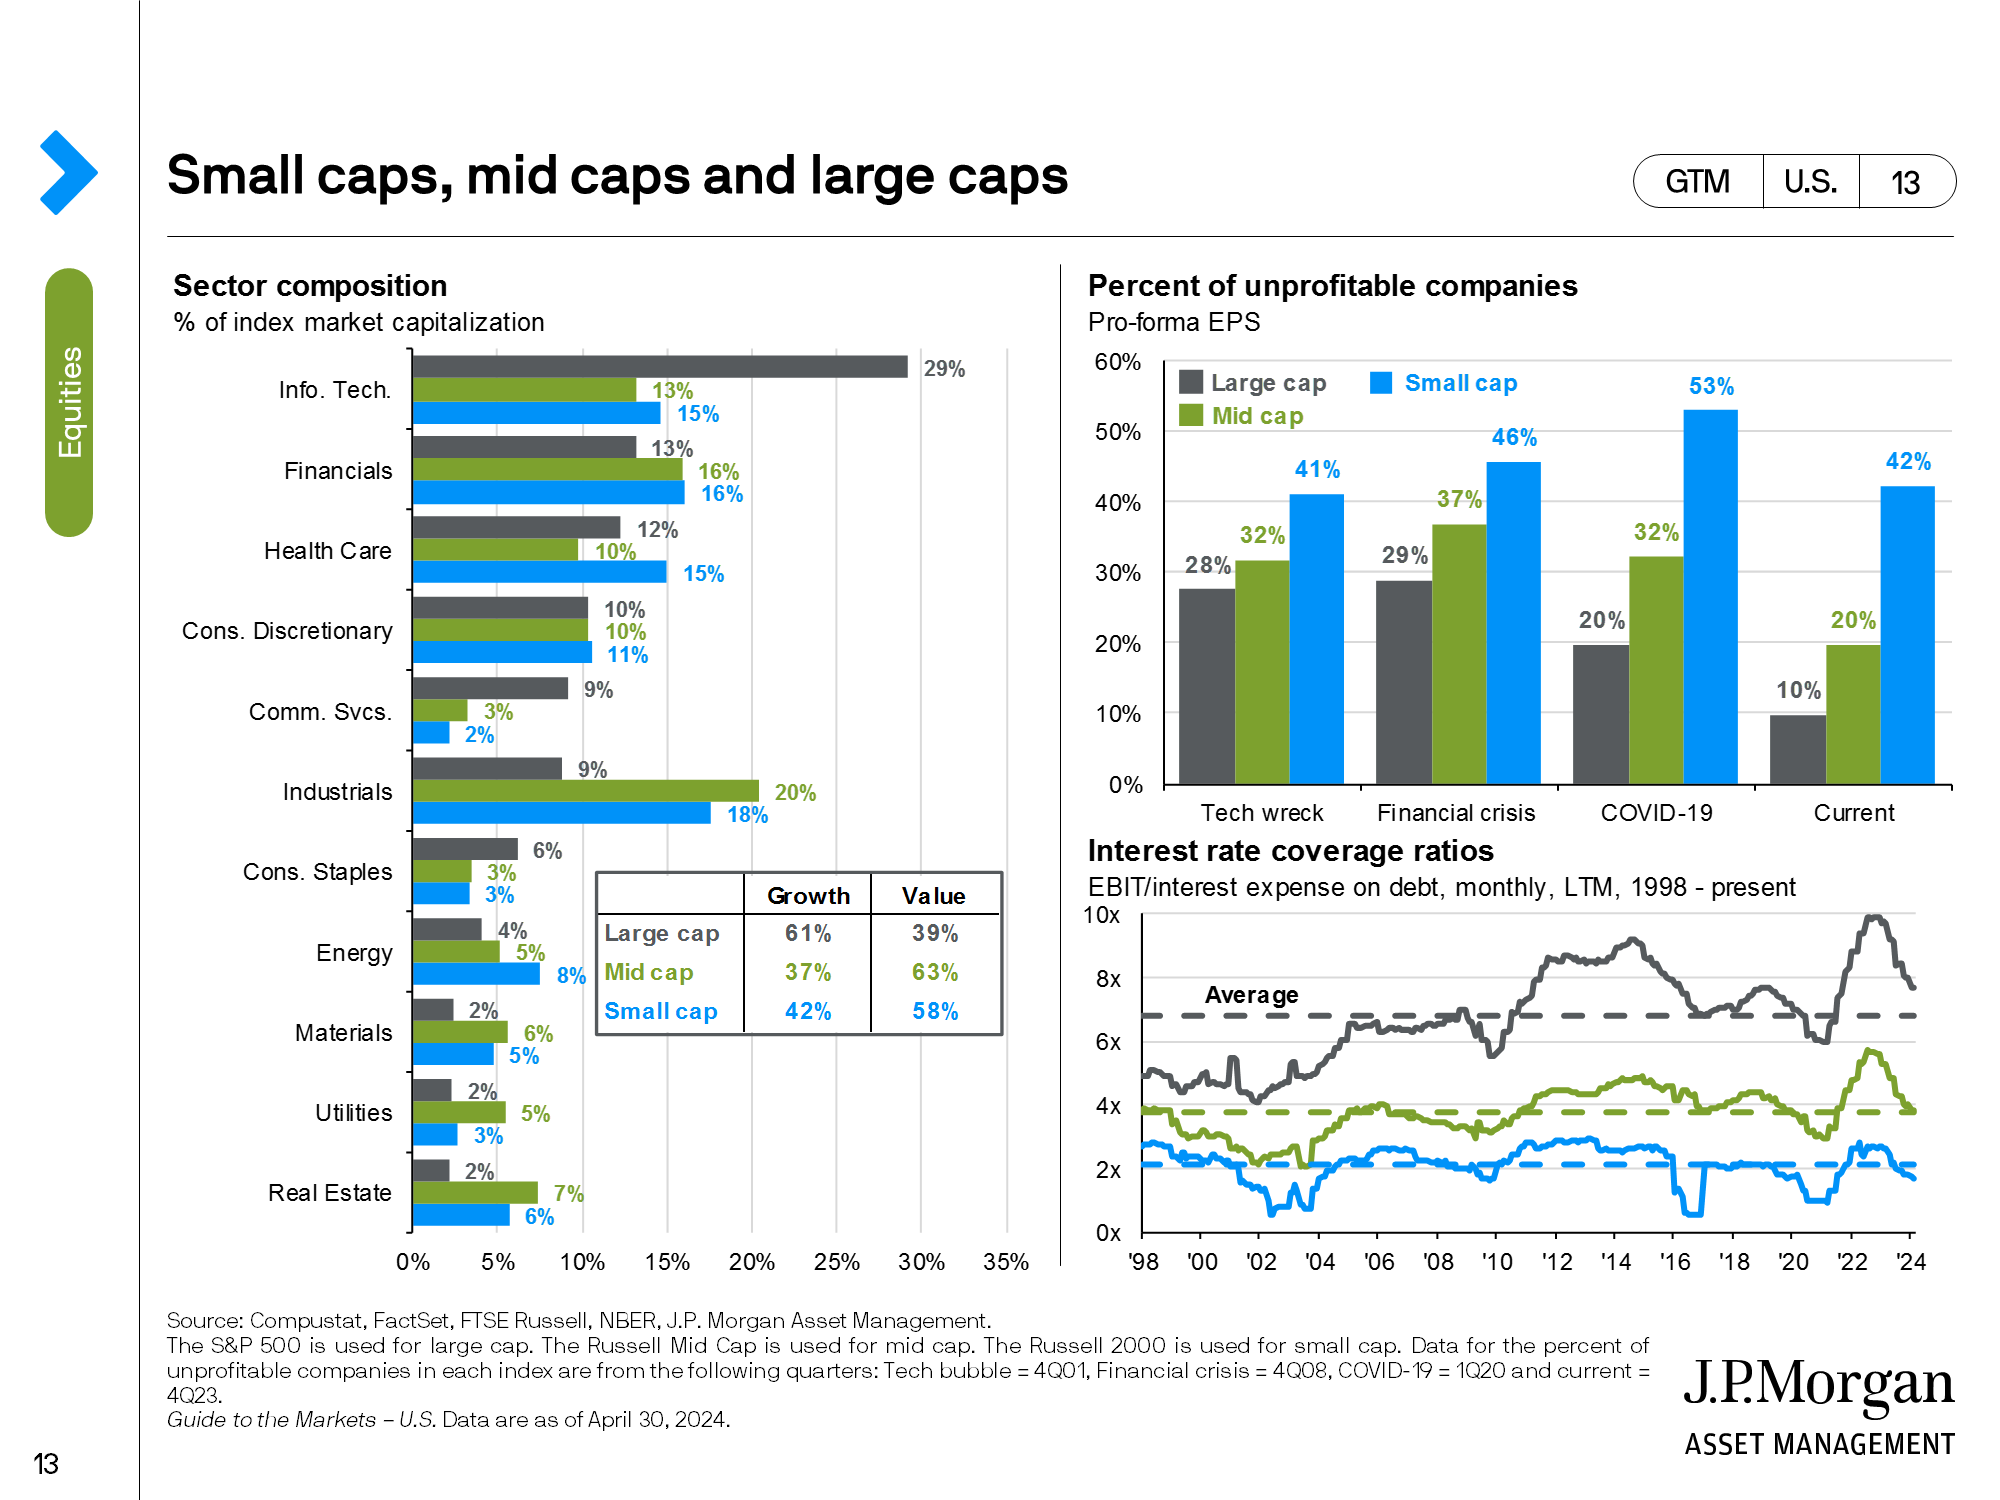 Returns and valuations by sector